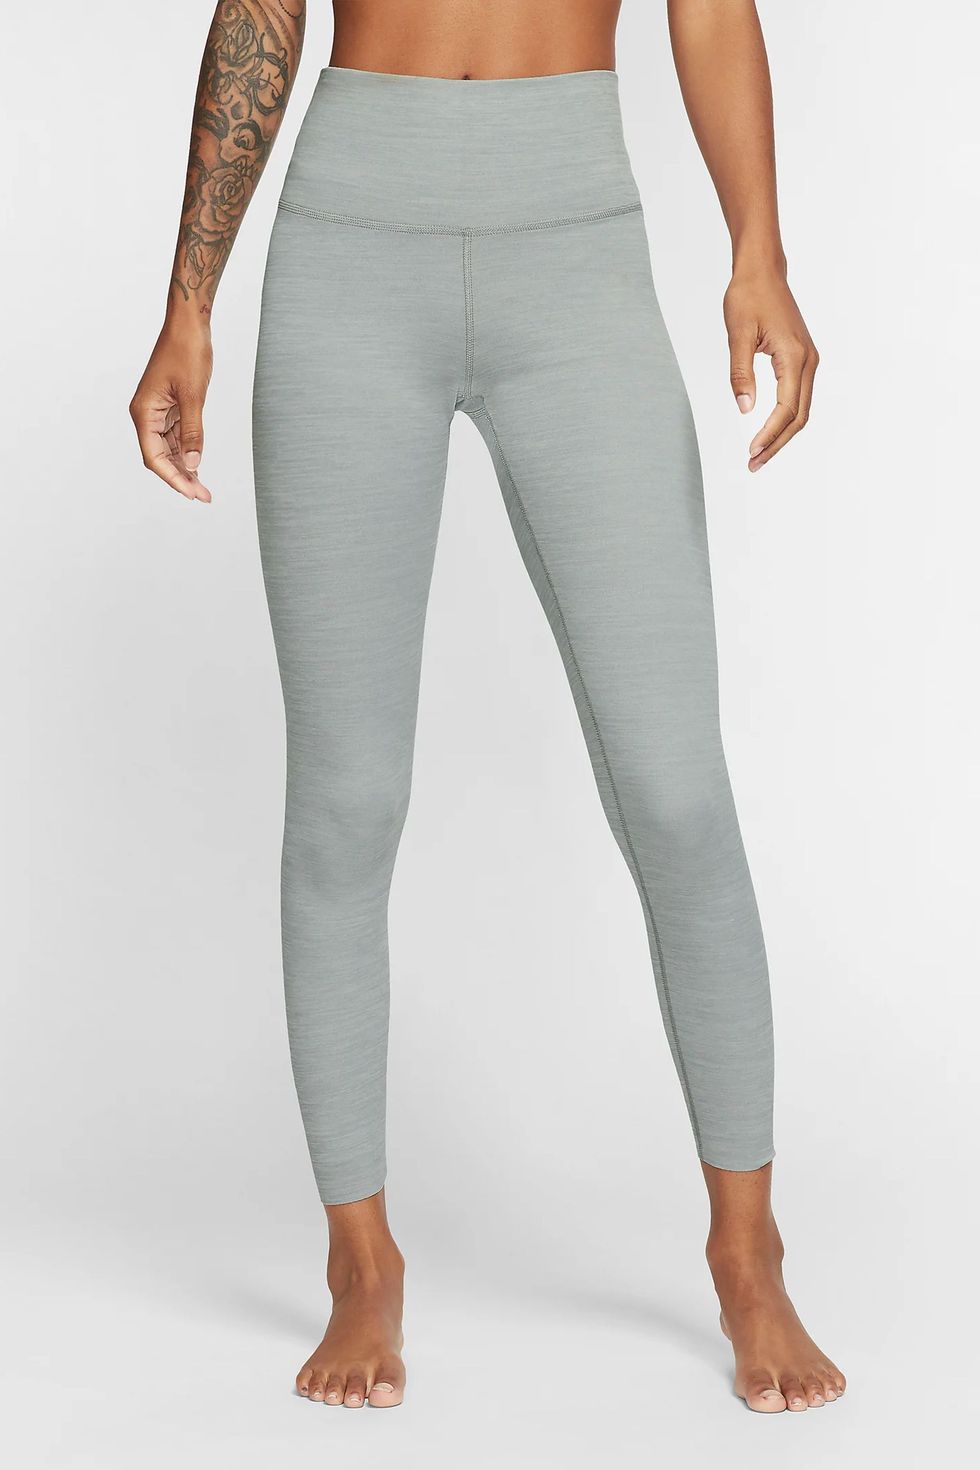 Attraco Leggings Wick Away Moisture and Keep You Warm in the